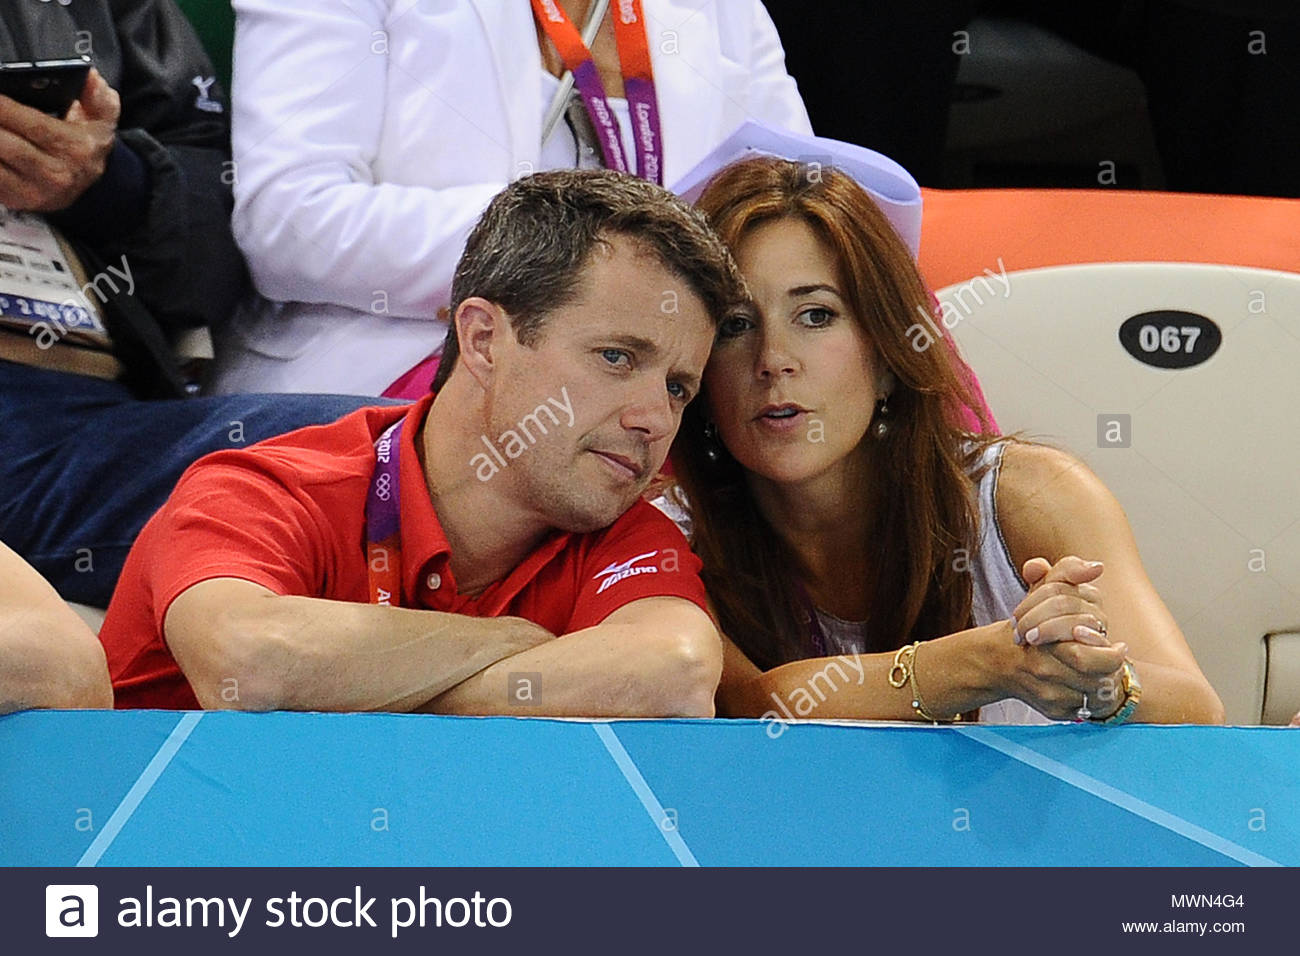 crown-princess-mary-and-prince-frederik-of-denmark-royals-at-the-swimming-pool-during-the-london-2012-olympic-games-id-number-0338581-MWN4G4.jpg